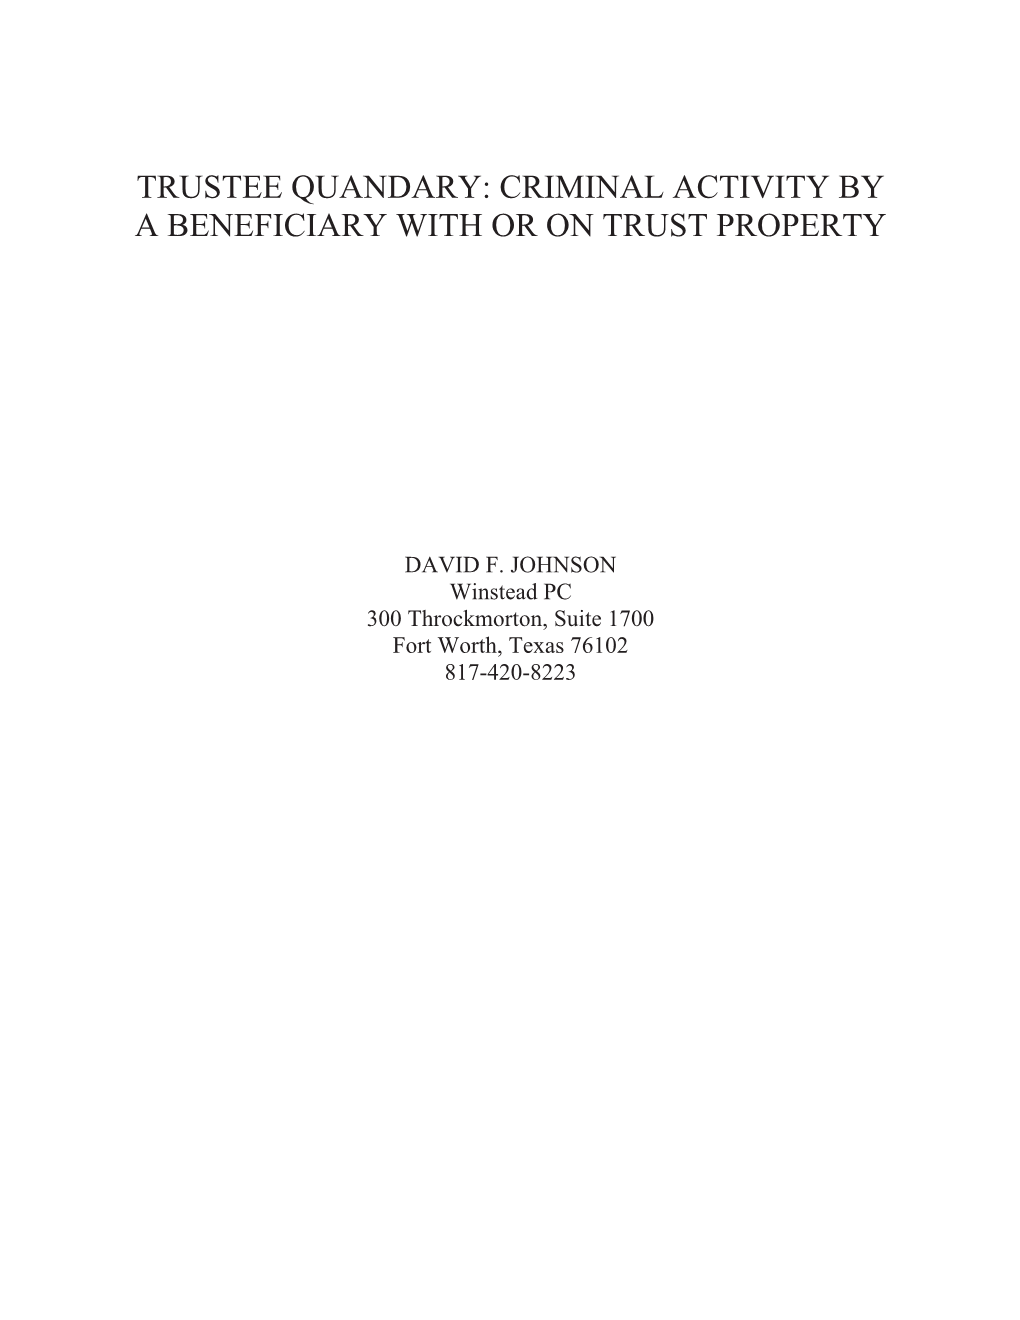 Trustee Quandary: Criminal Activity by a Beneficiary with Or on Trust Property